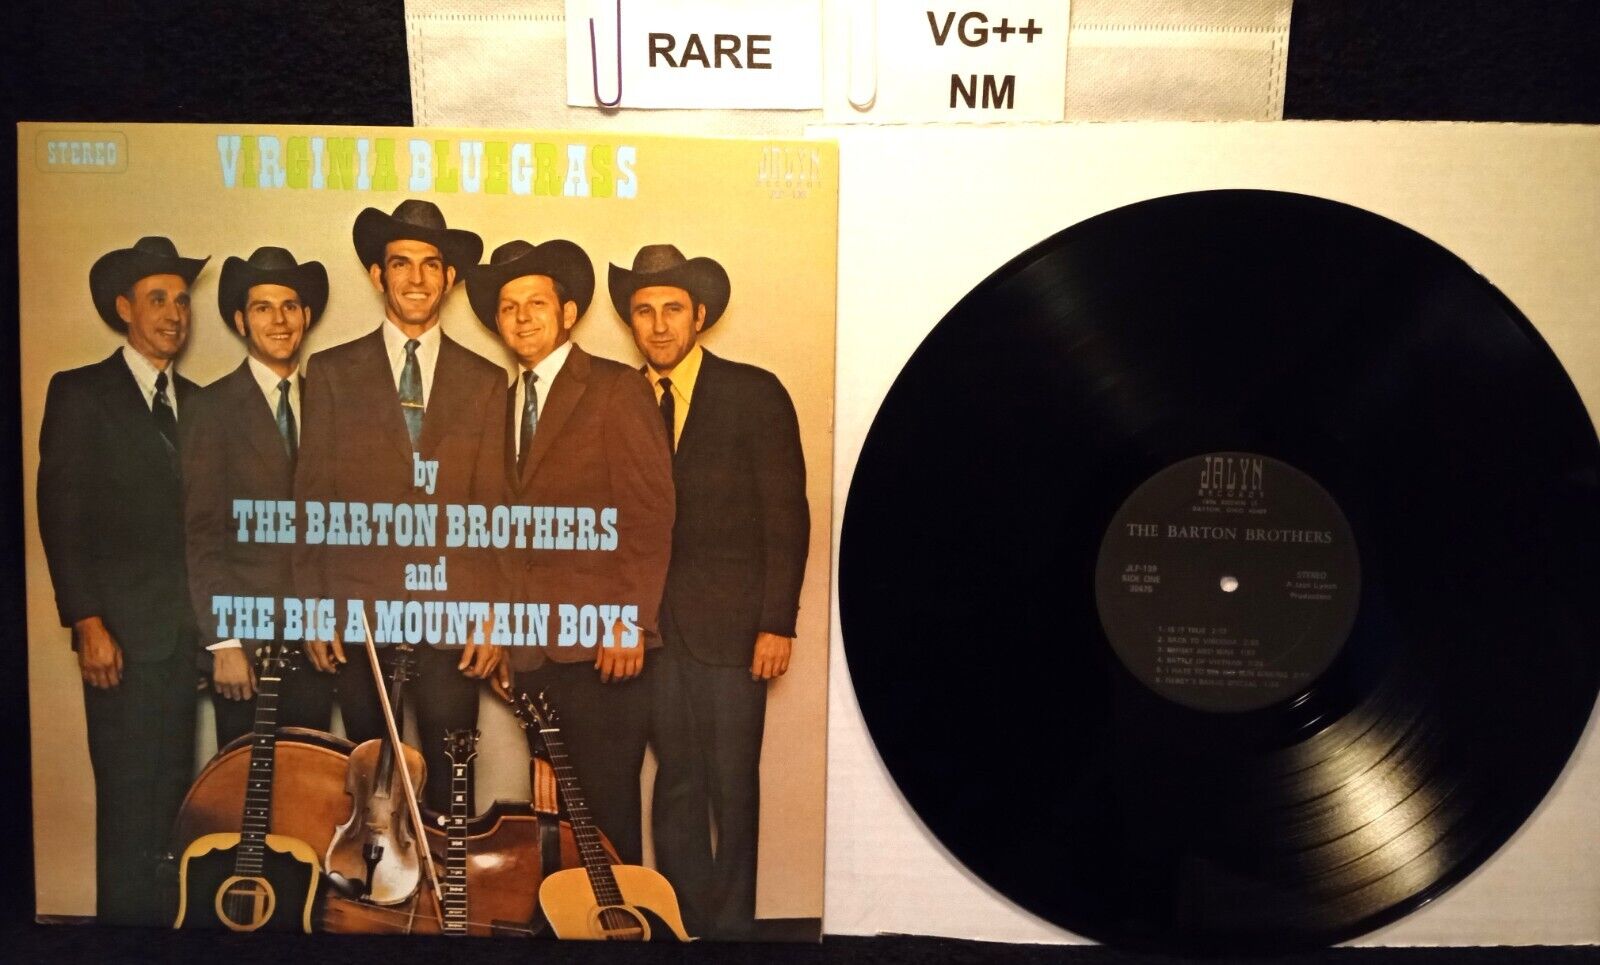 ALPHA BY ARTIST:BARTON BROTHERS (VIRGINIA BLUEGRASS) ULTRA RARE:"CLASSIC COUNTRY" DISCOUNT-VINTAGE-VINYL-LP LOT ($5 NO LIMIT SHIP)  4-09-24